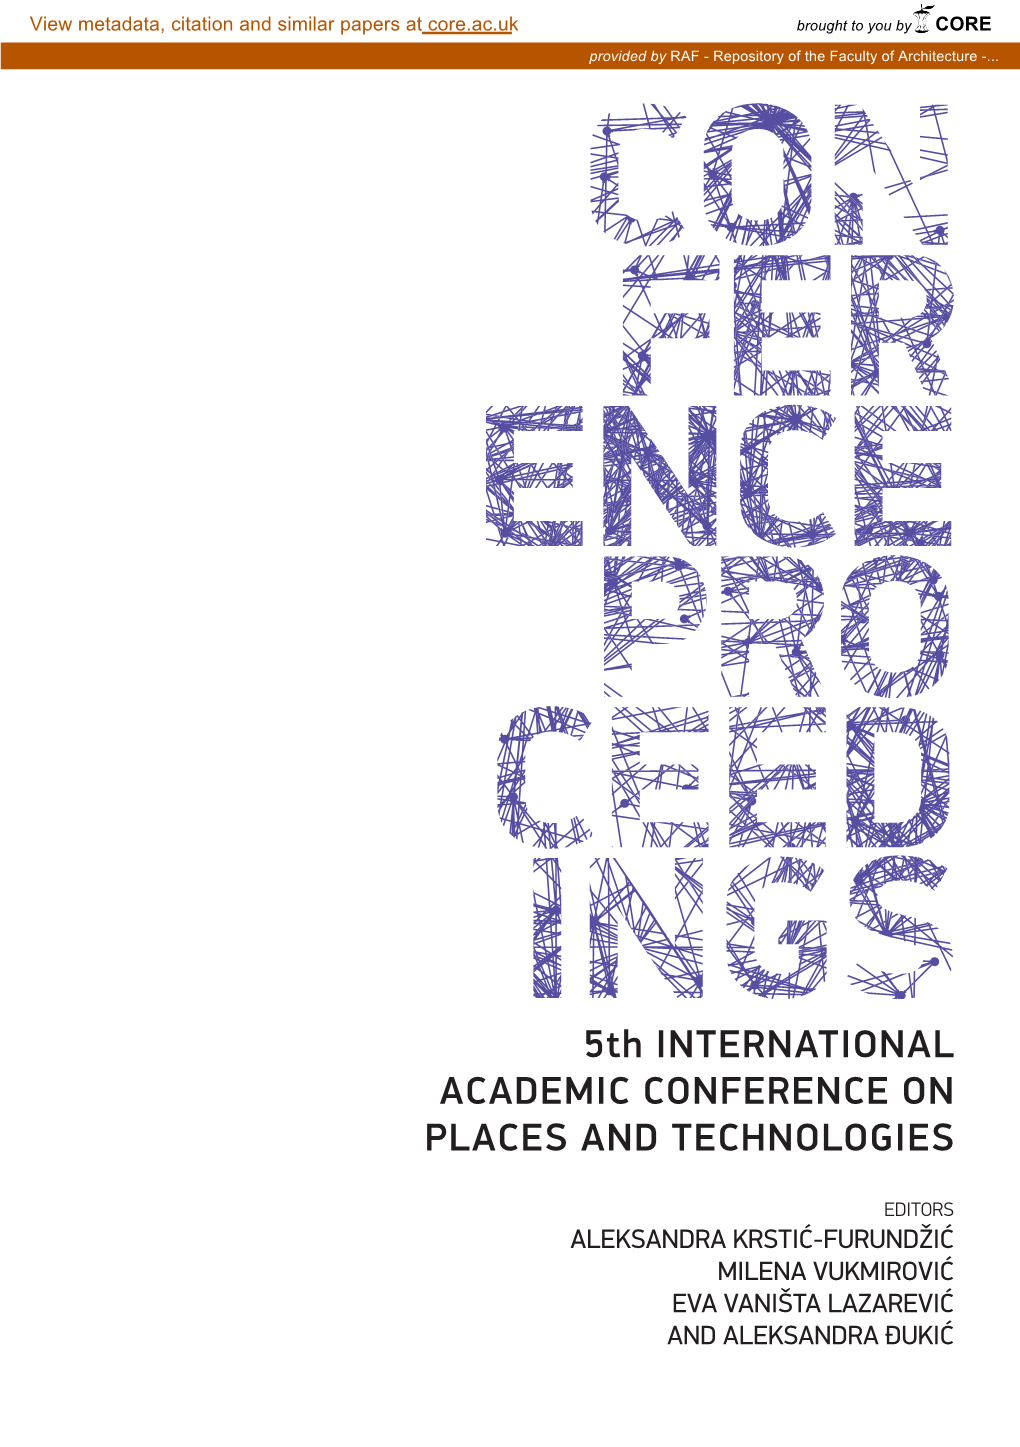 5Th INTERNATIONAL ACADEMIC CONFERENCE on PLACES and TECHNOLOGIES